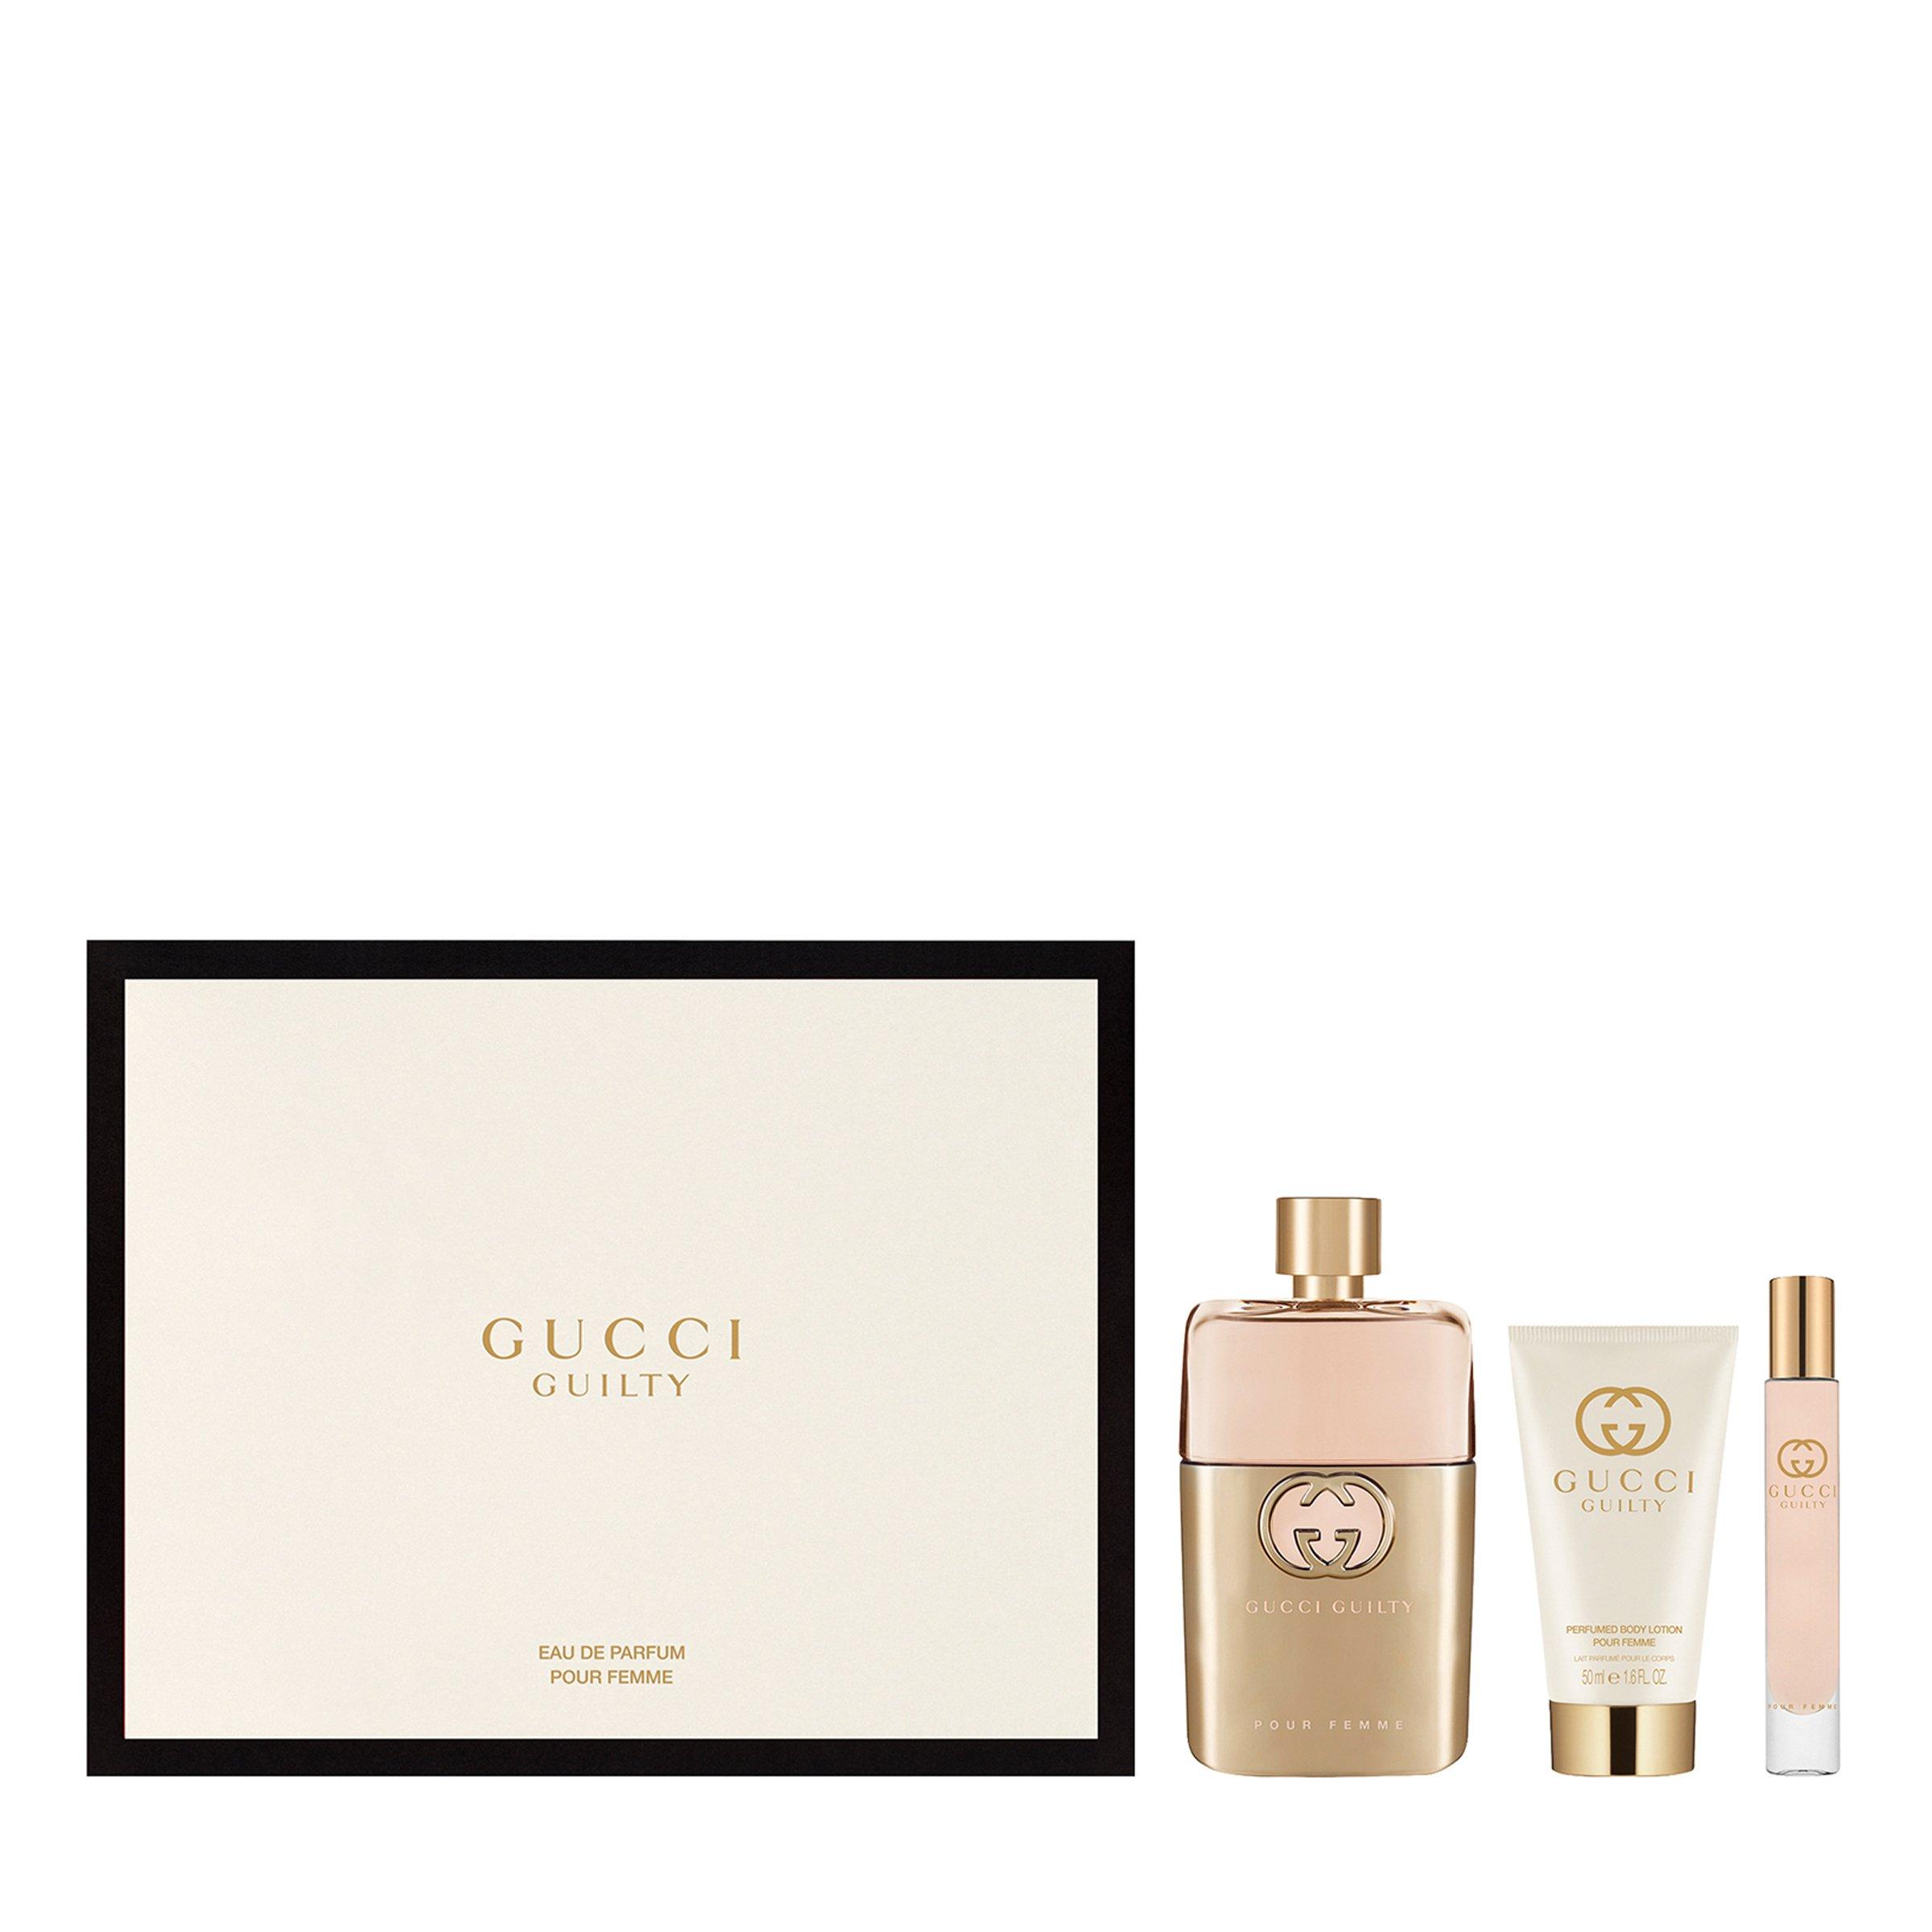 Buy Gucci Guilty PF EDP Gift set Online 